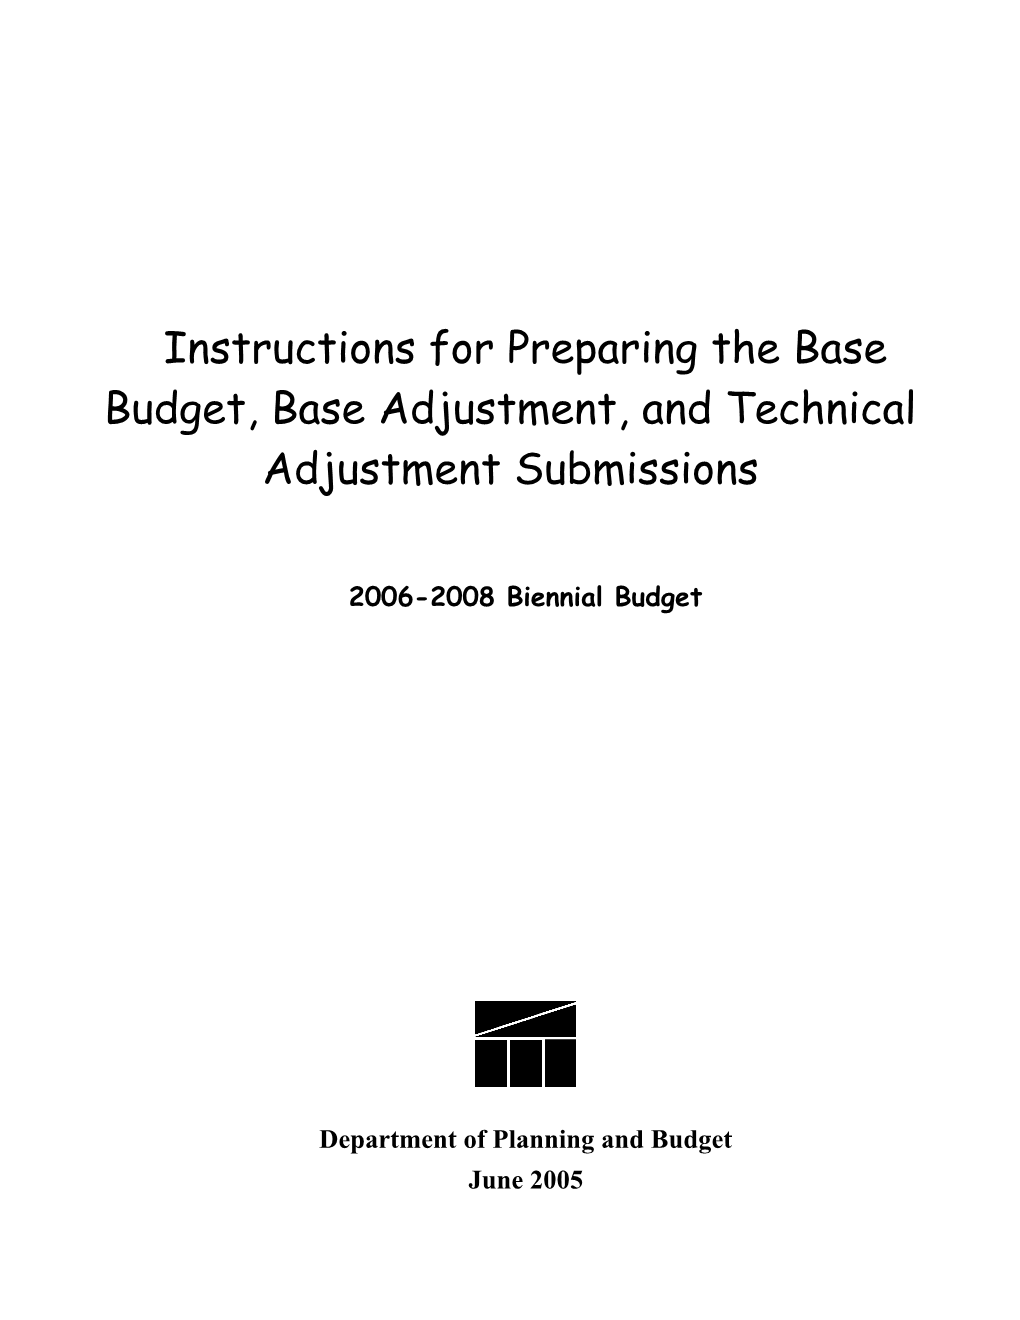 Instructions for Preparing the Base Budget Submission